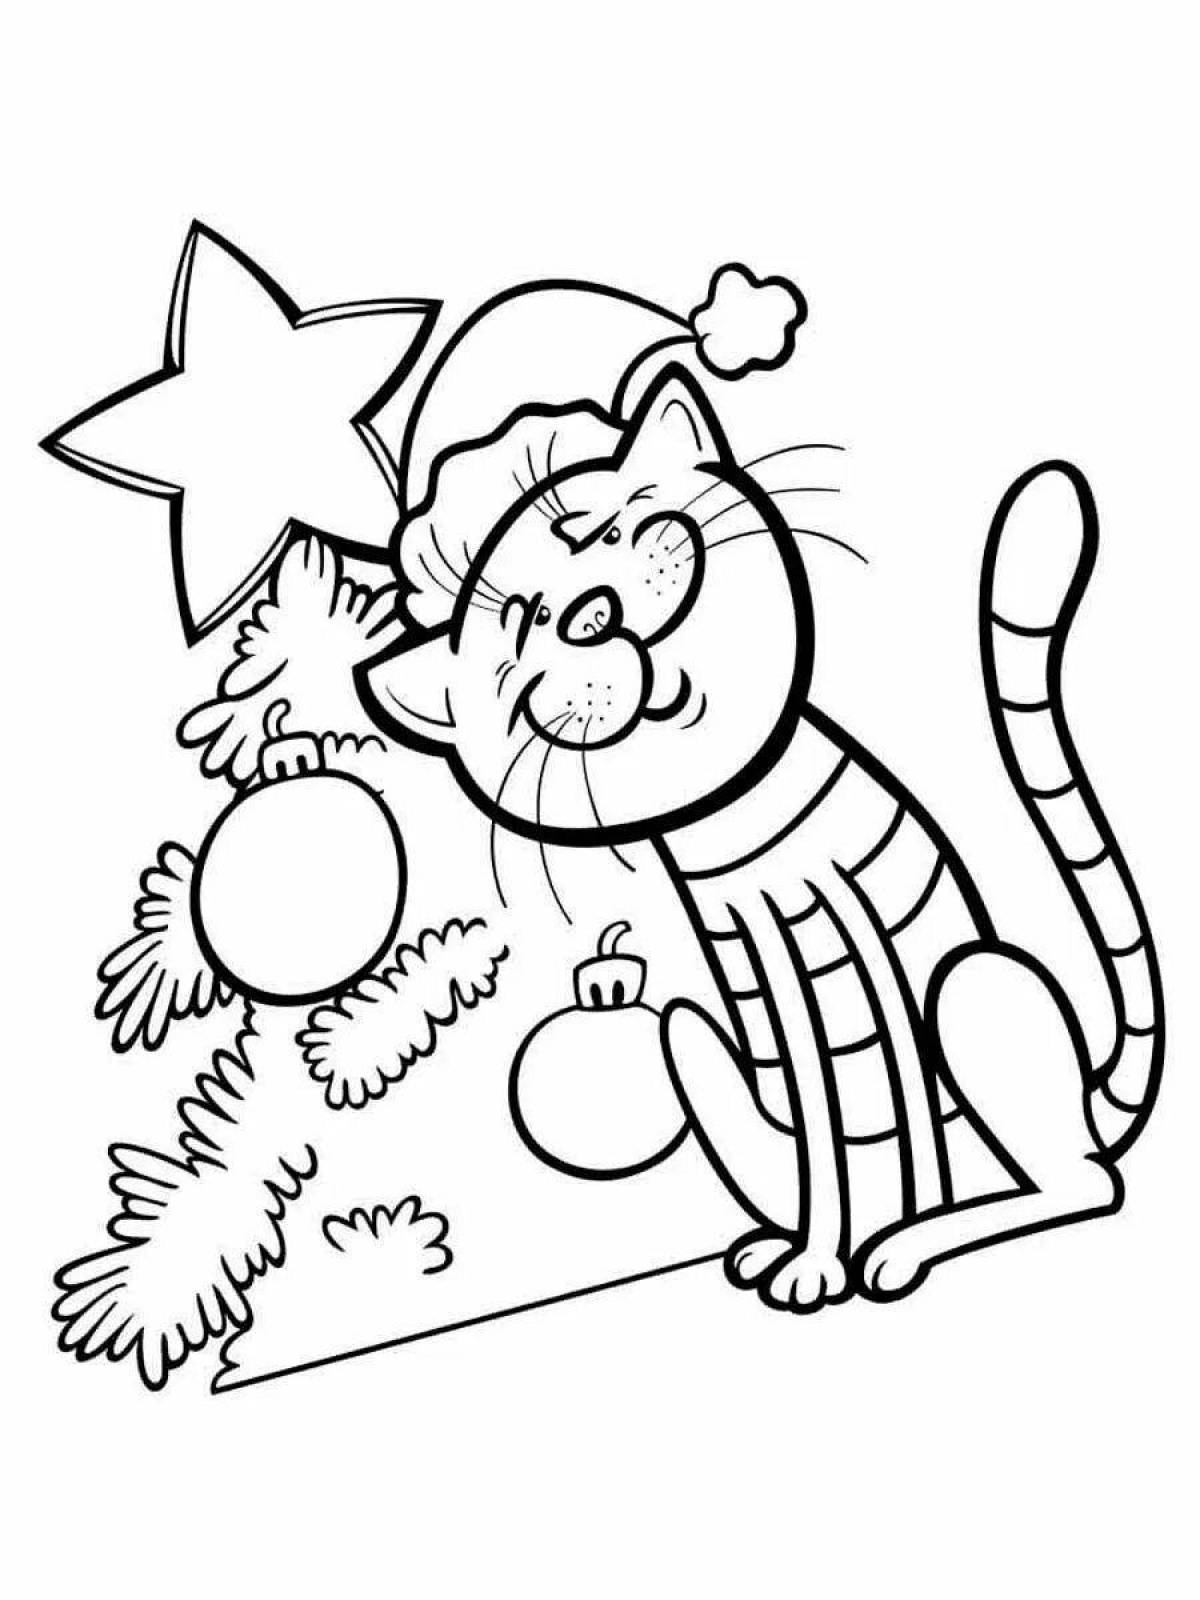 Fancy year of the cat coloring book